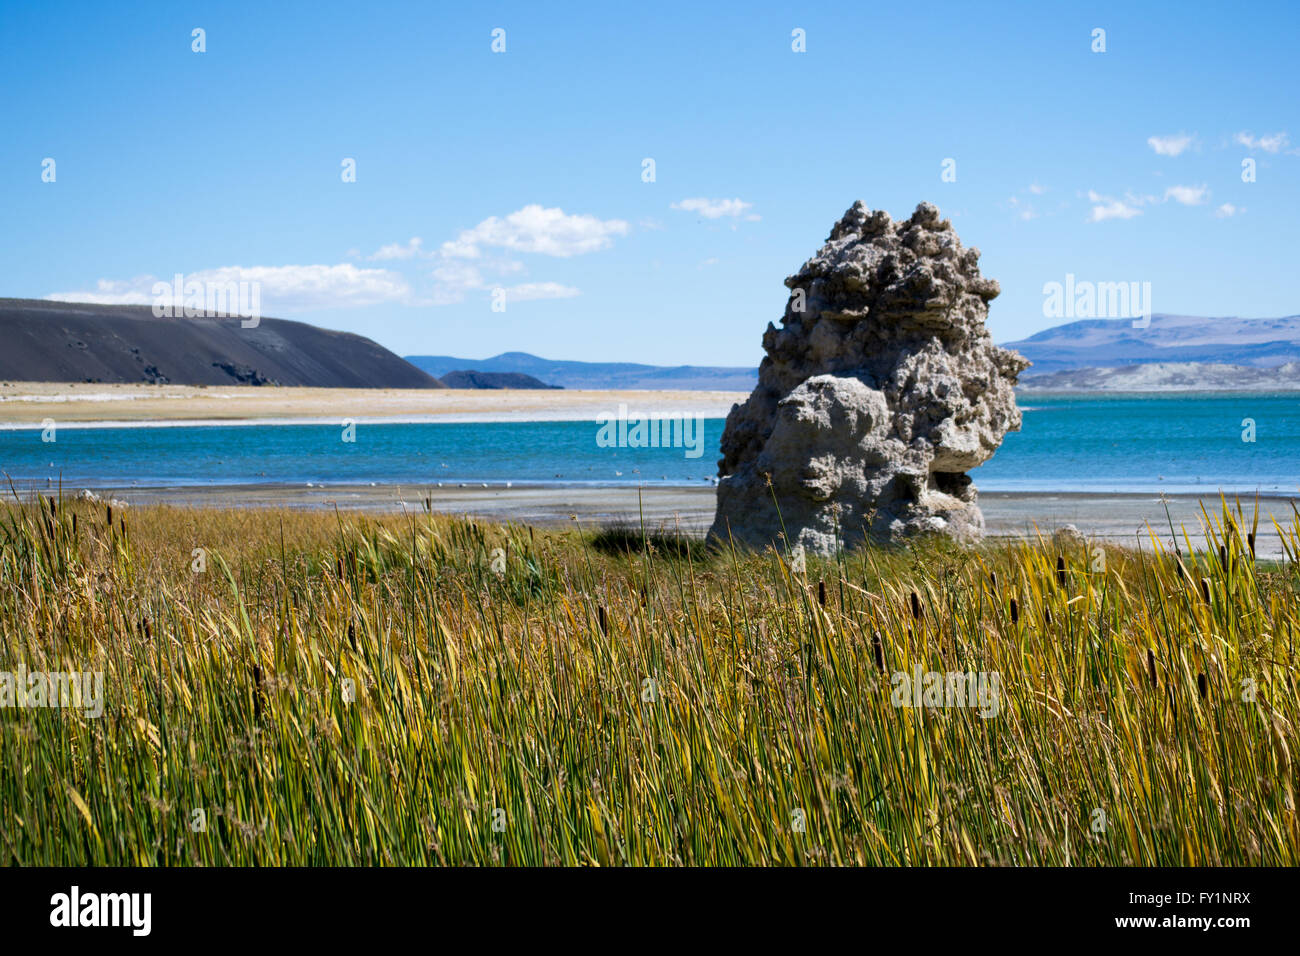 Mono Lake, a large shallow saline lake with limestone formations on a fall day at the base of Sierra Nevada mountains. Stock Photo